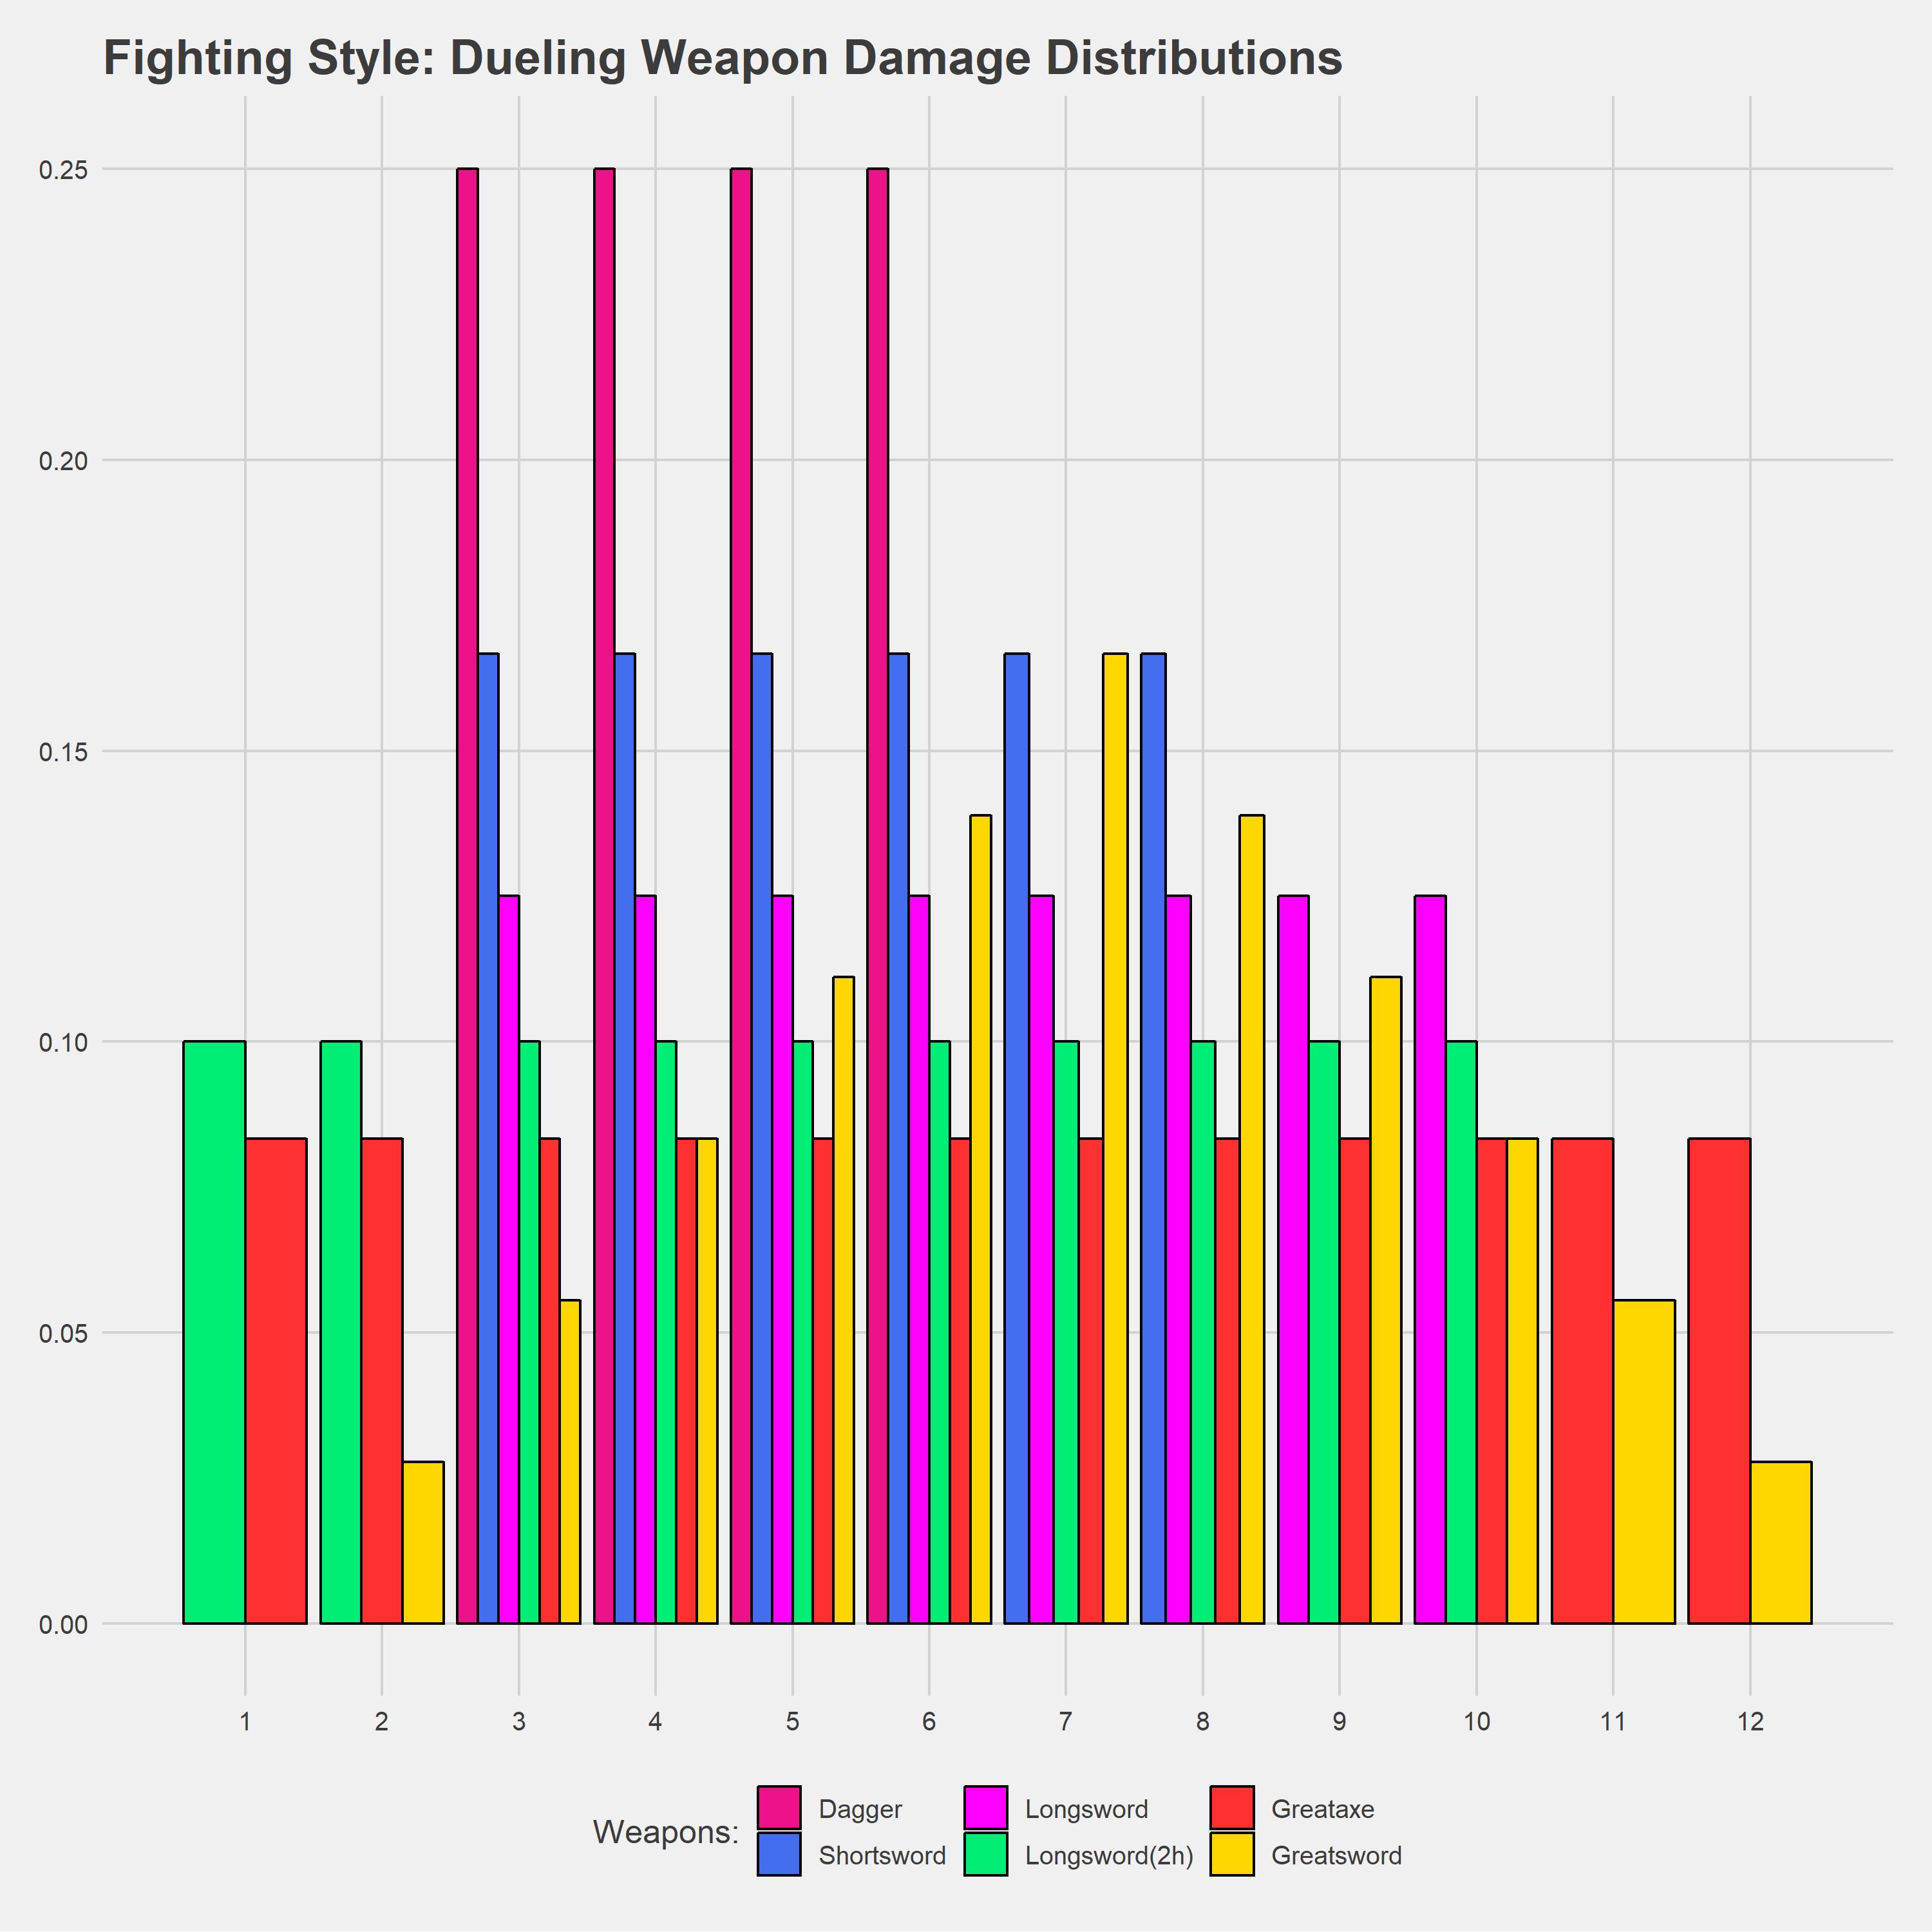 Fighting Style Dueling Damage Distribution